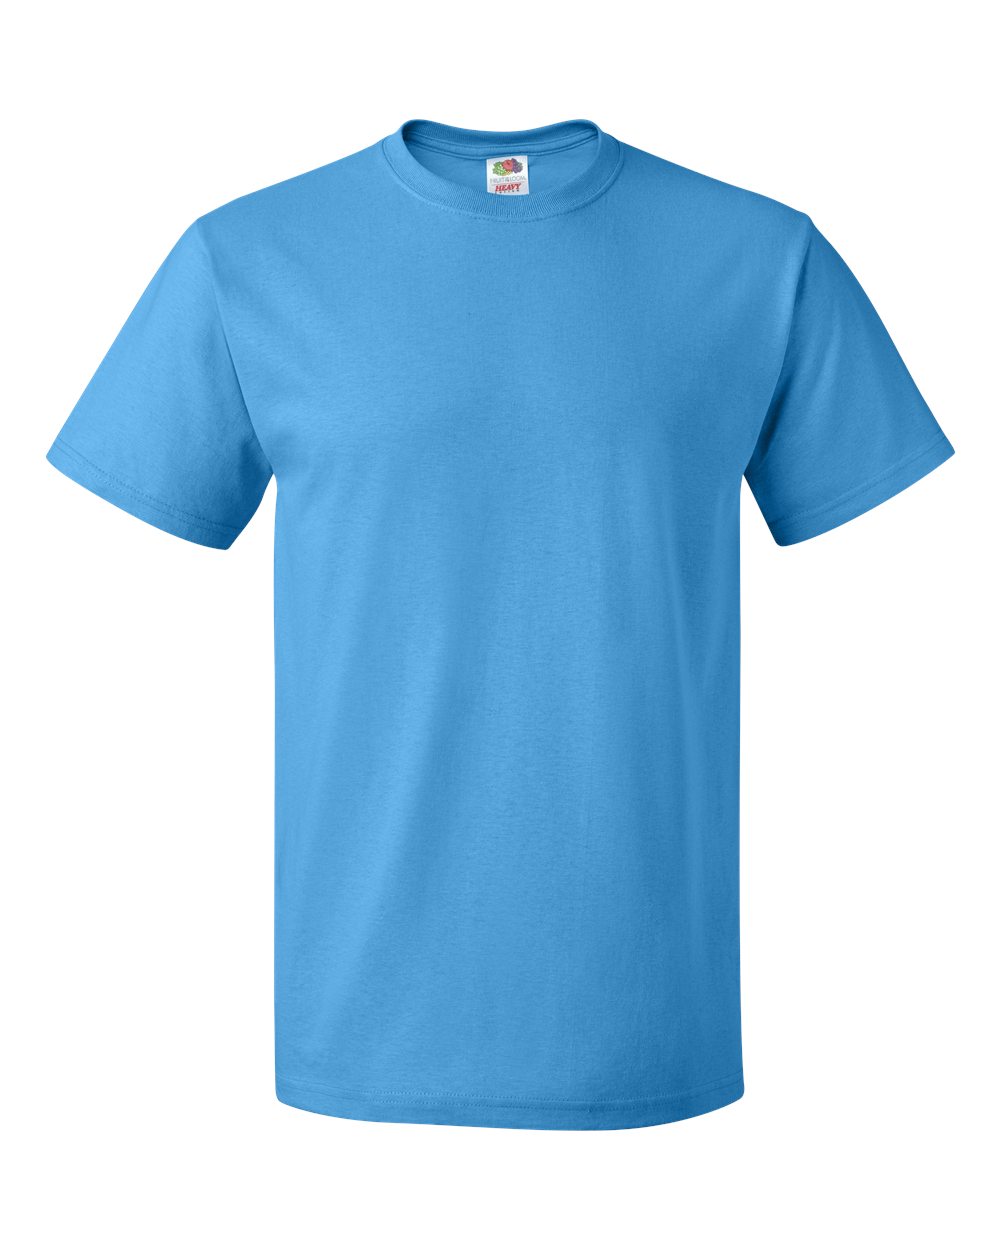 Custom T-Shirts Canada, Design Your Own T-Shirts Online